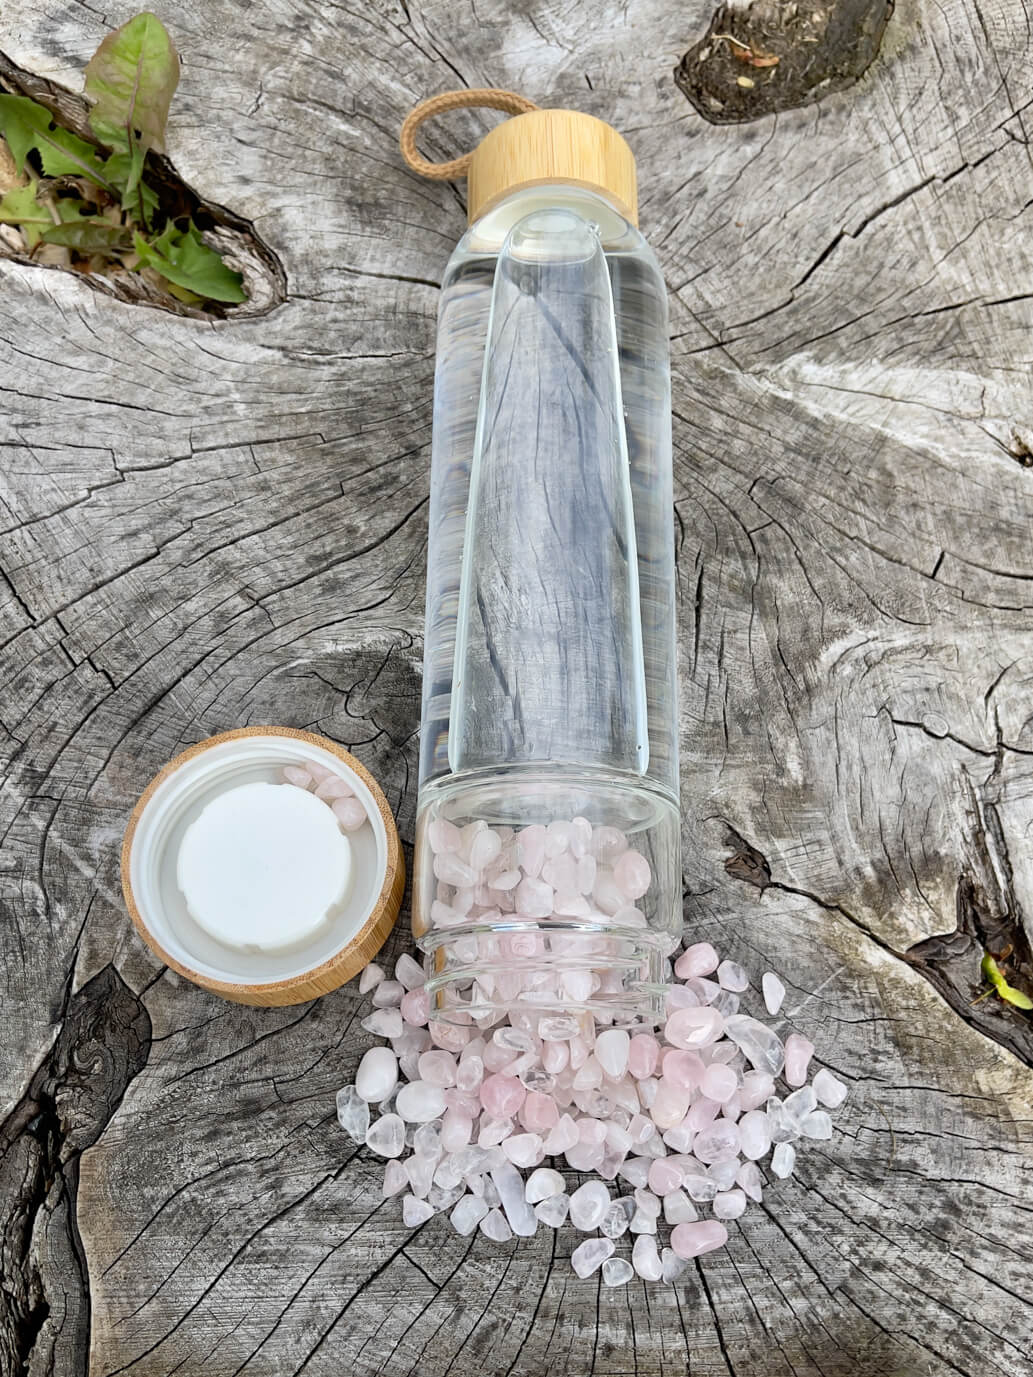 Crystal Infused Bamboo Water Bottle with Rose Quartz - Stay Hydrated 💧